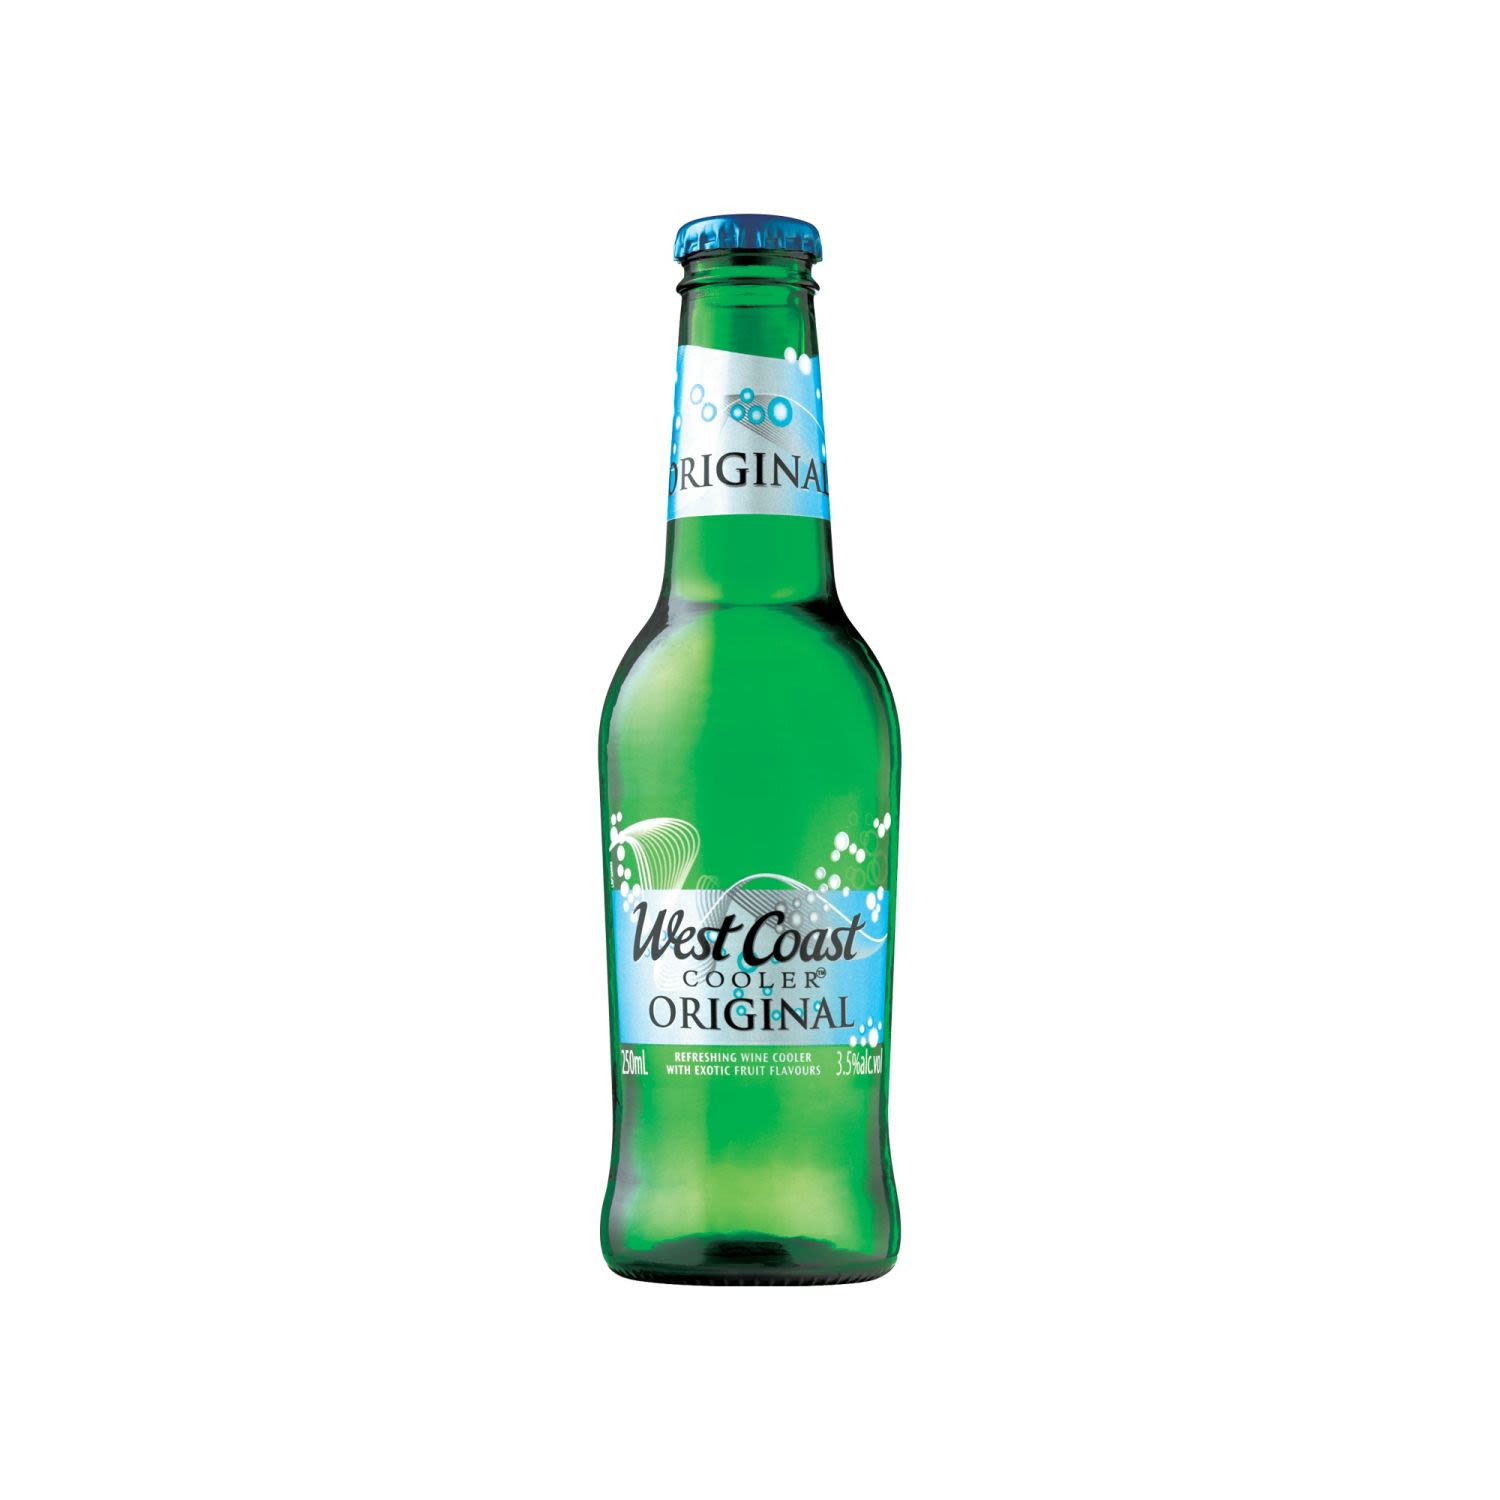 West Coast Cooler is a wine based cooler with exotic fruit flavours. Its crisp, balanced taste are complemented with hints of exotic fruits and an effervescent finish, making it a refreshing alternative to beer or cider.<br /> <br />Alcohol Volume: 3.50%<br /><br />Pack Format: 24 Pack<br /><br />Standard Drinks: 0.7<br /><br />Pack Type: Bottle<br /><br />Country of Origin: Australia<br />